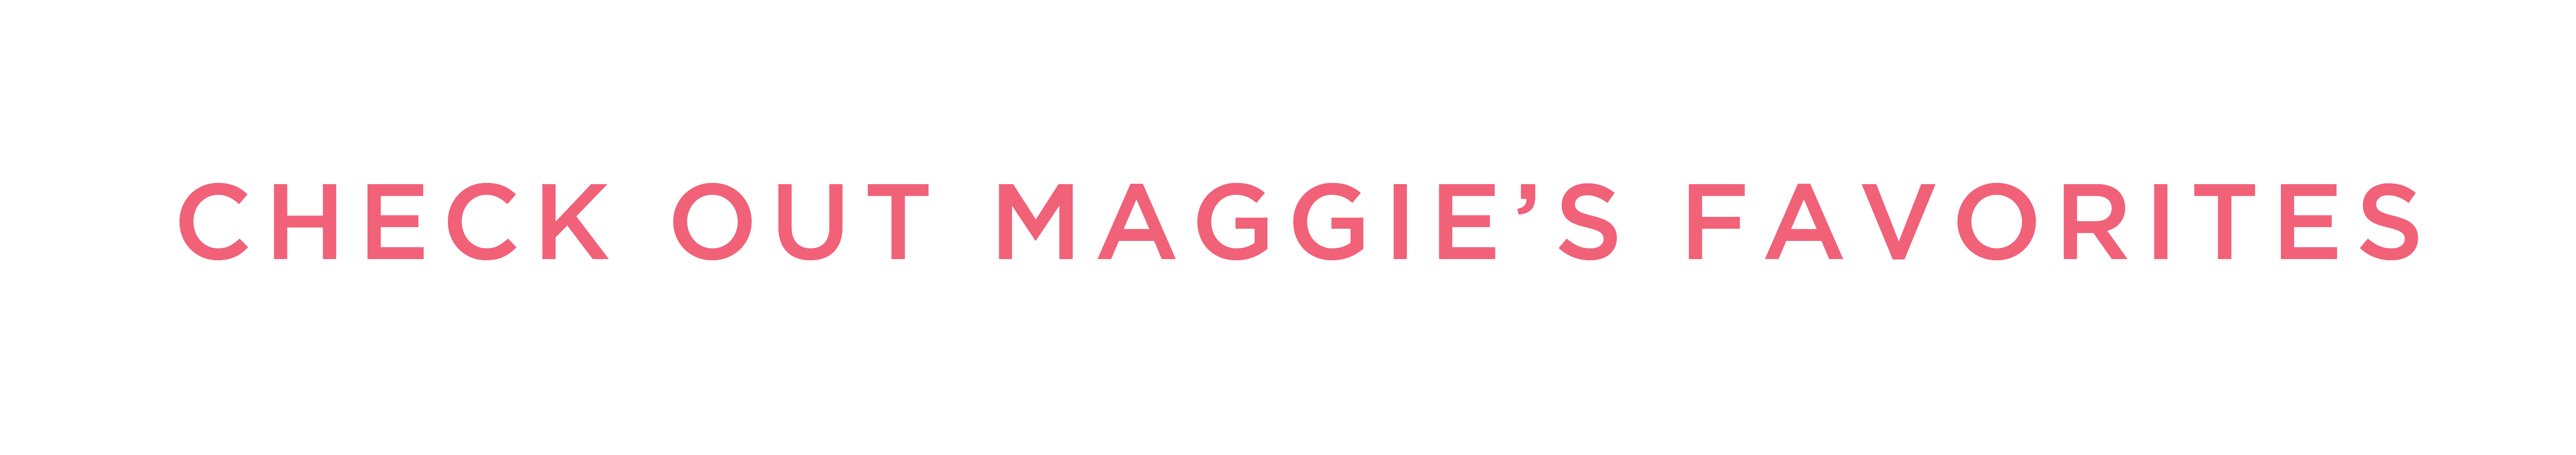 Maggies Favorites New Arrivals Product Recommendations 